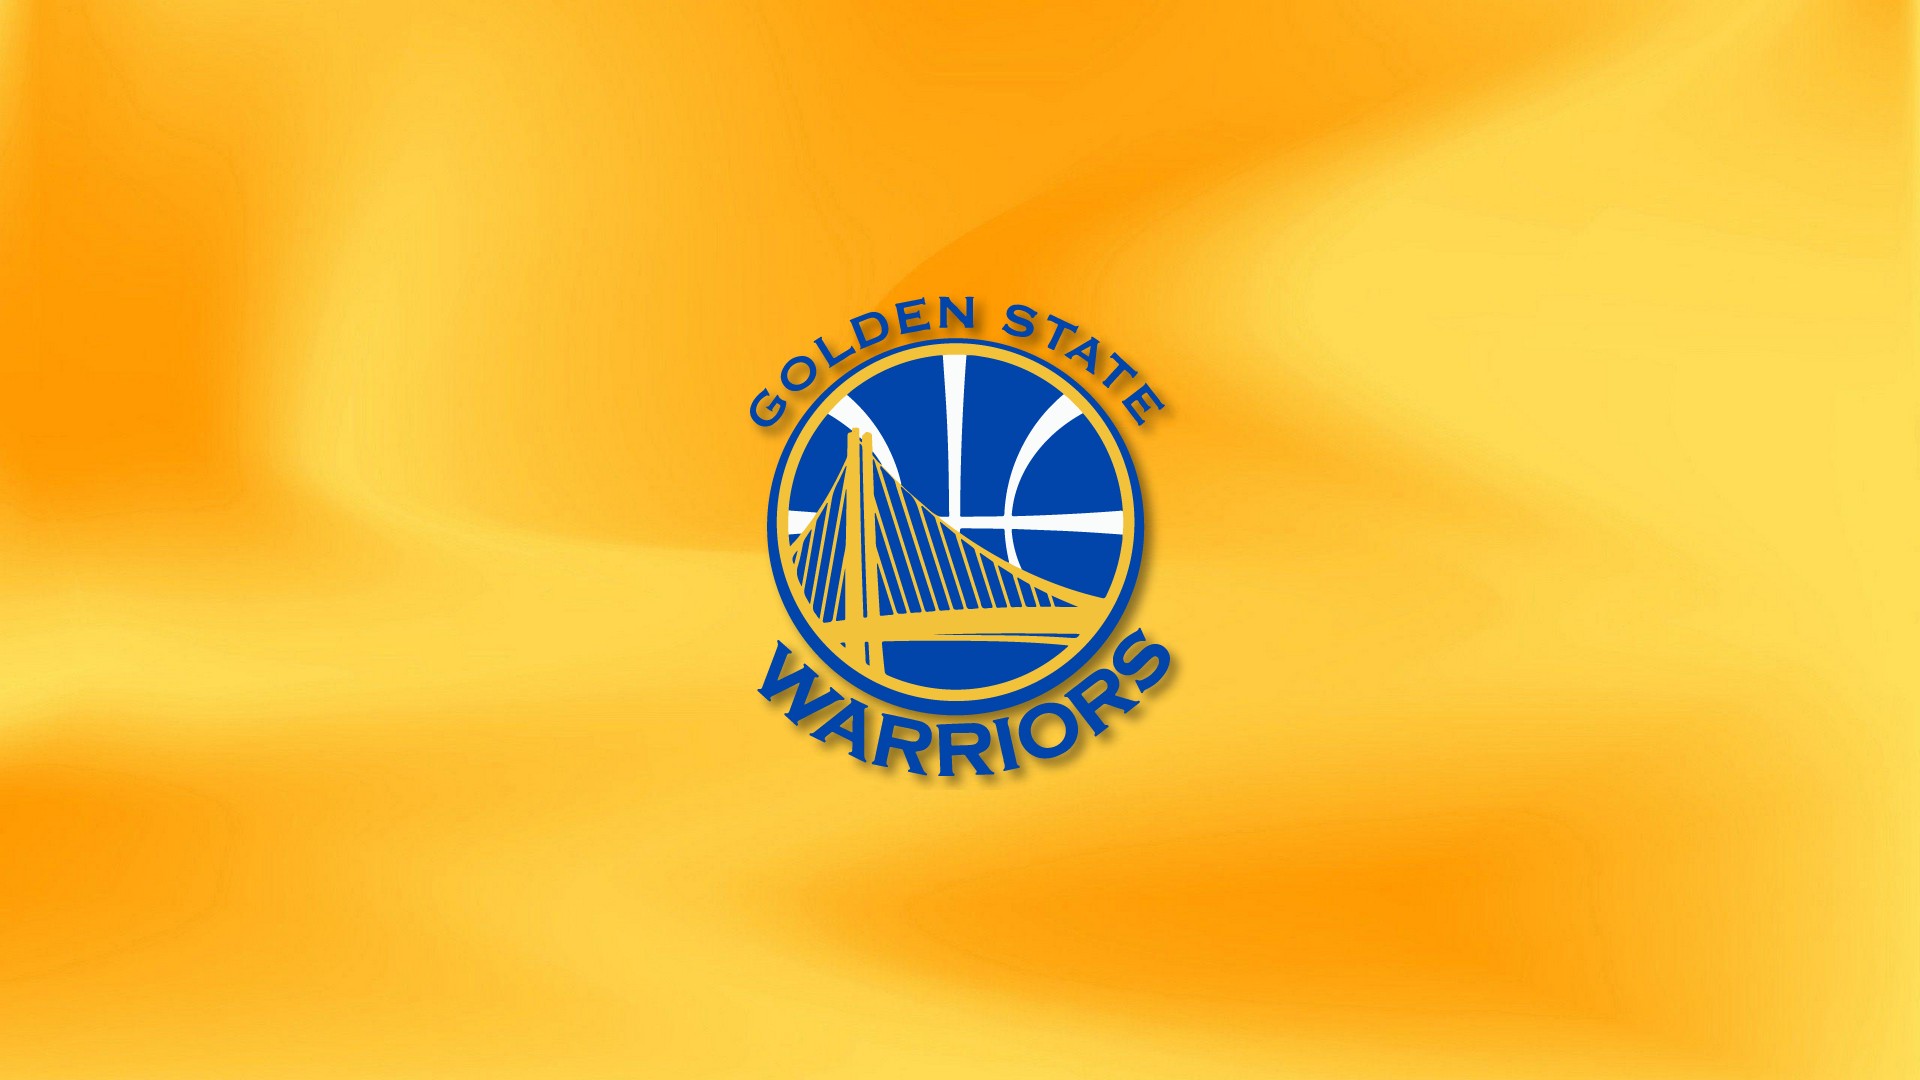 HD Backgrounds Golden State Basketball with high-resolution 1920x1080 pixel. You can use this wallpaper for your Desktop Computer Backgrounds, Windows or Mac Screensavers, iPhone Lock screen, Tablet or Android and another Mobile Phone device